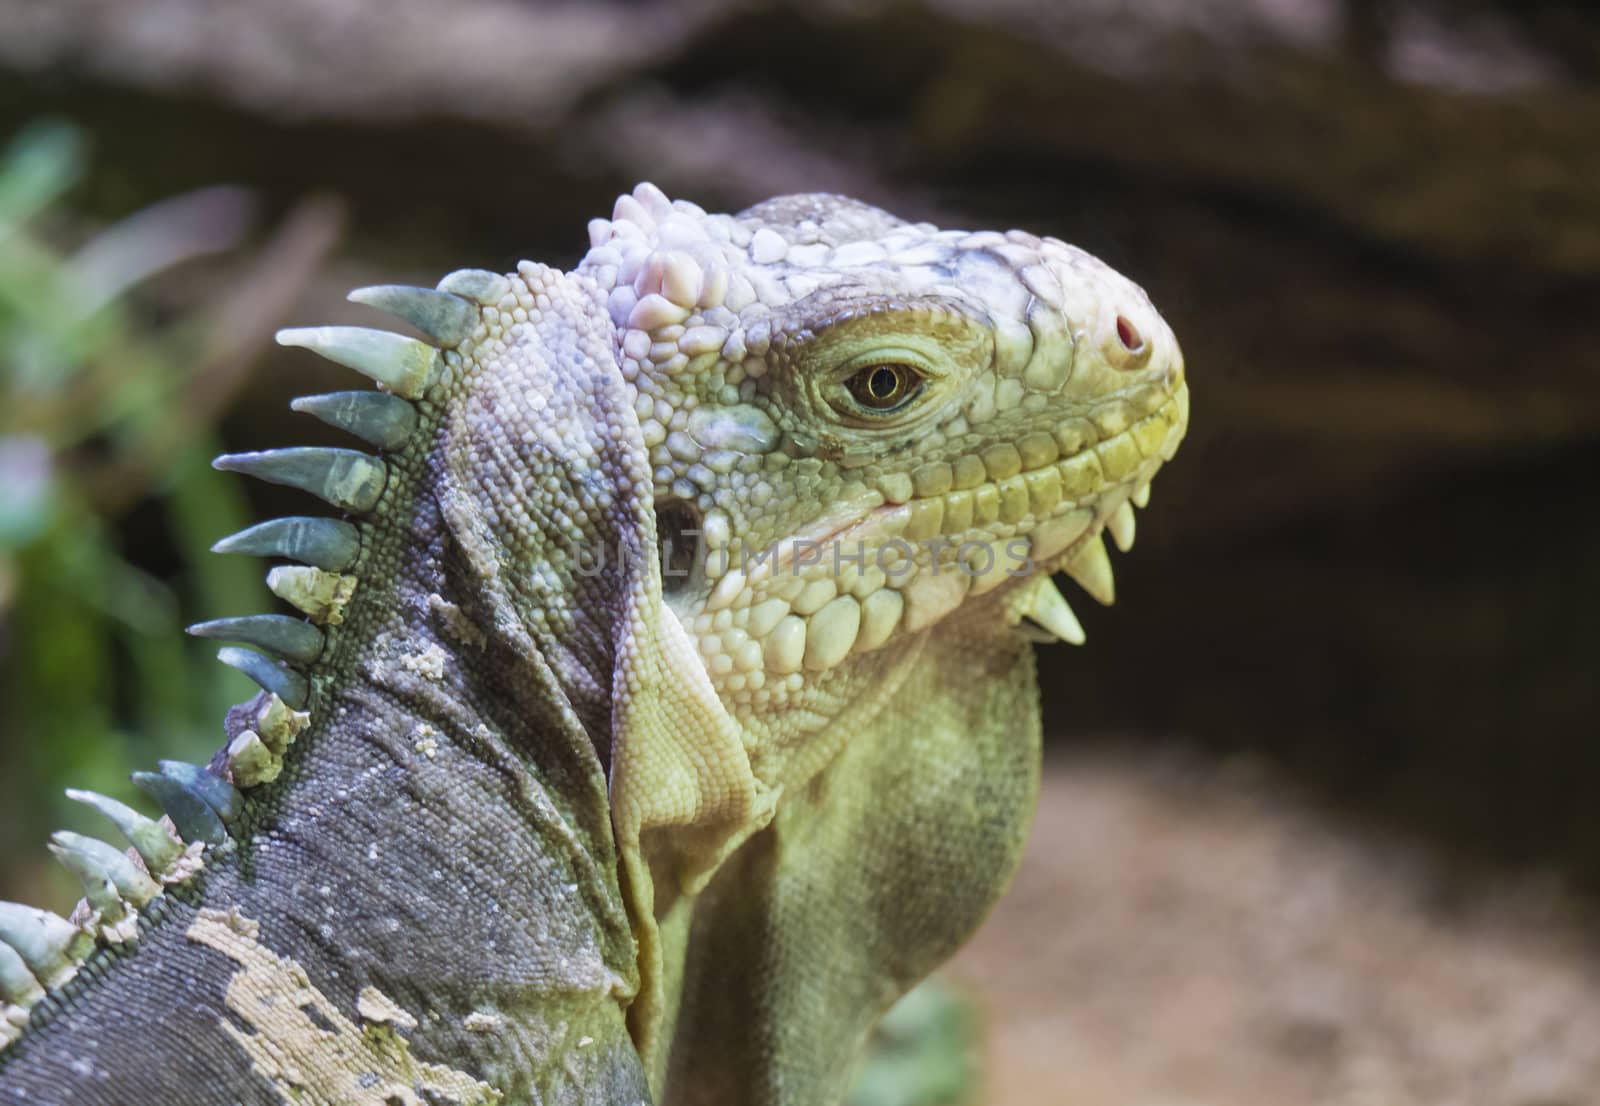 Close up portrait of a lesser Antillean iguana. Igauana delicatissima is a large arboreal lizard endemic to the Lesser Antilles, critically endangered large arboreal lizard. Selective focus on eye